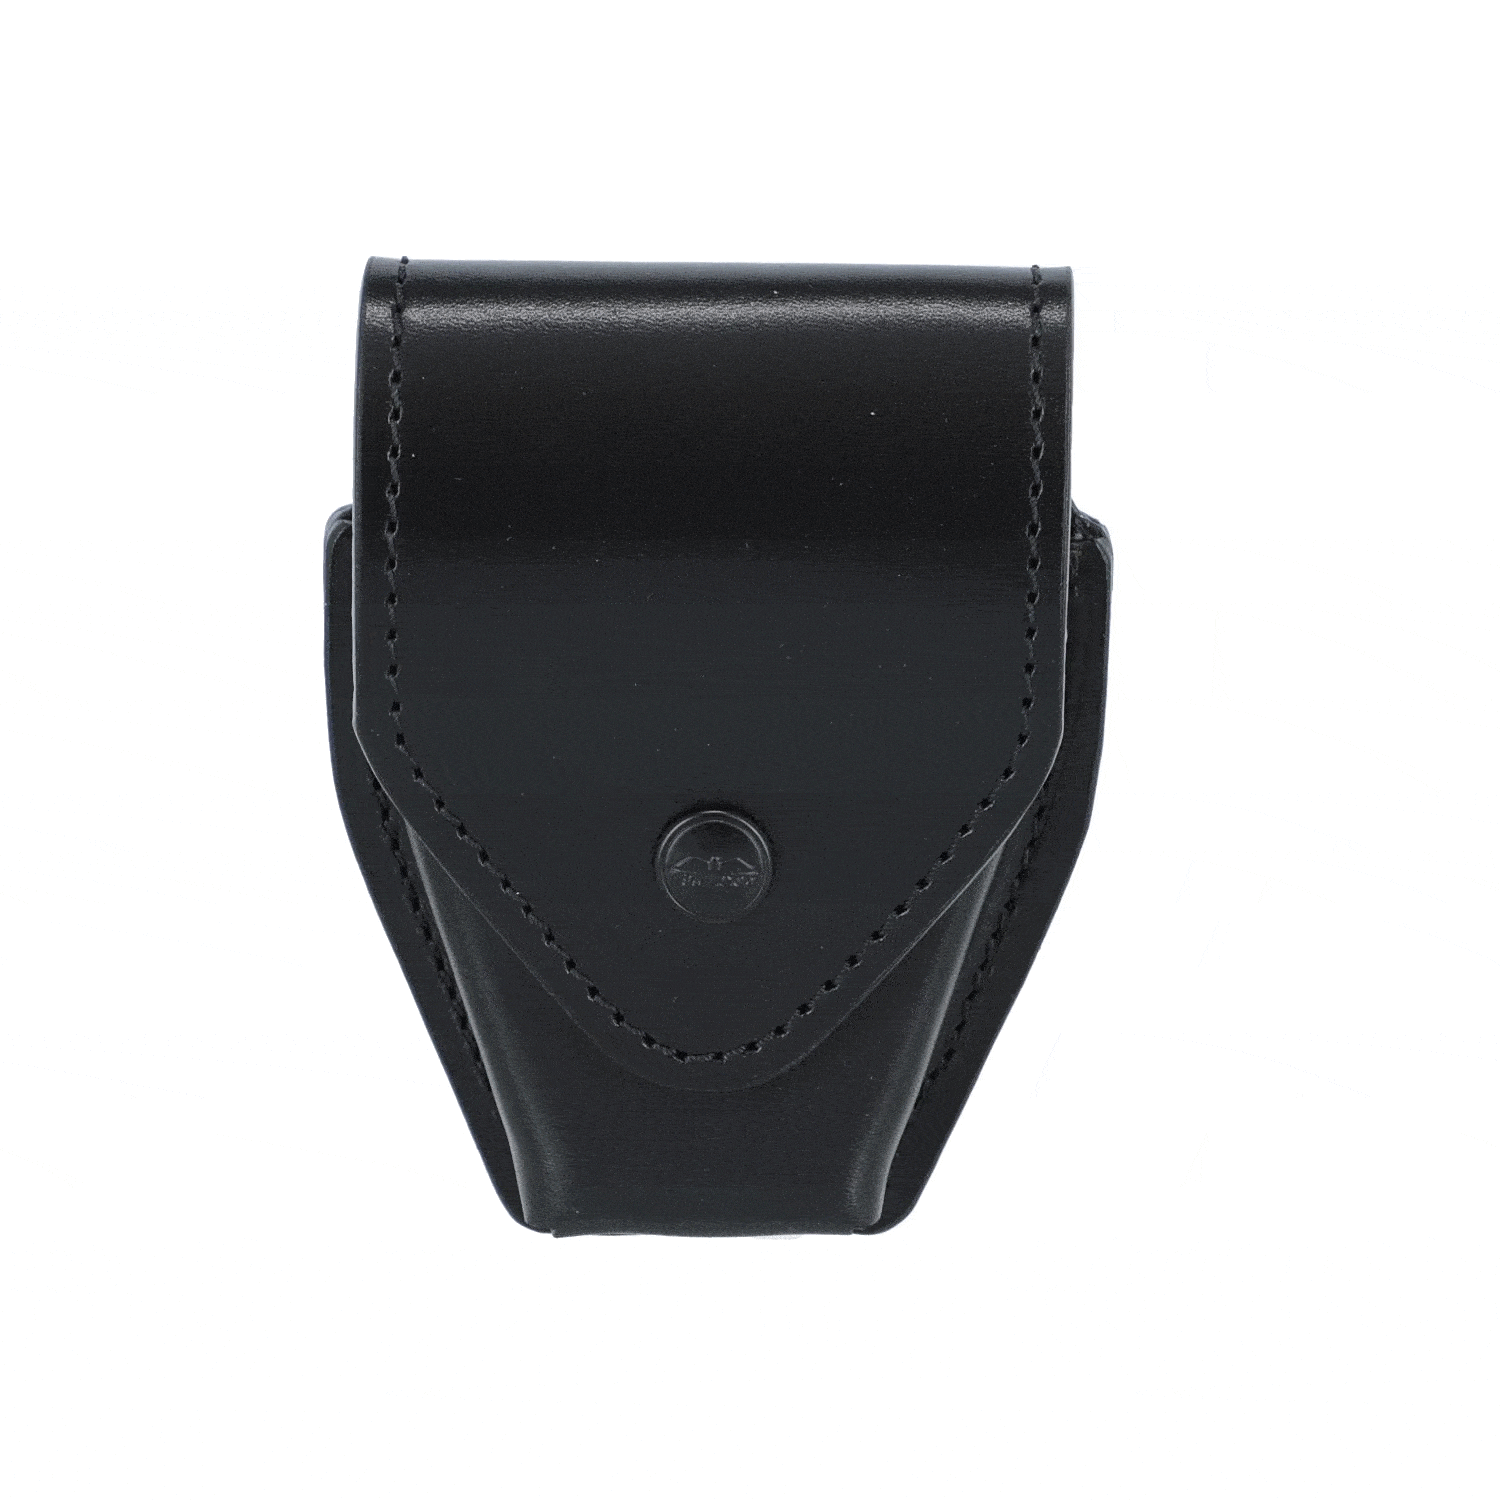 Duty leather handcuffs pouch